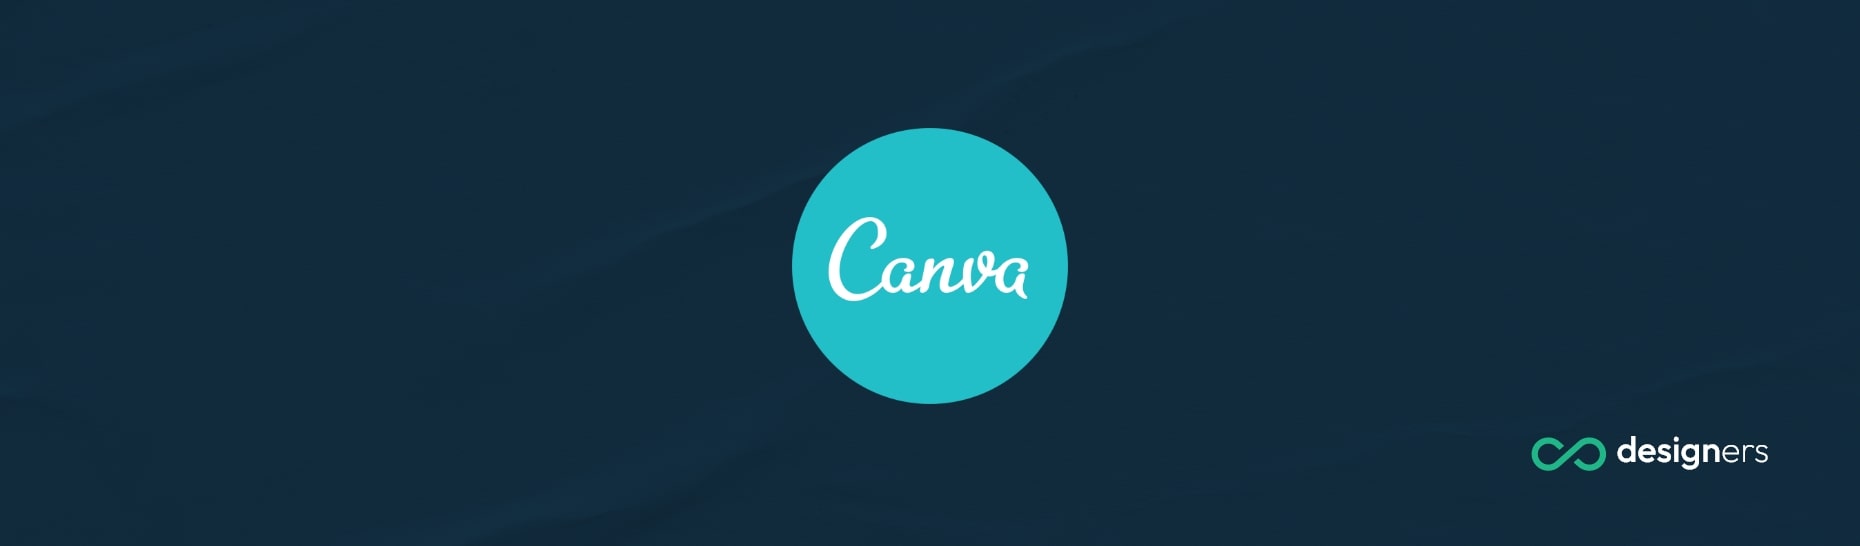 What Devices Is Canva Compatible With?